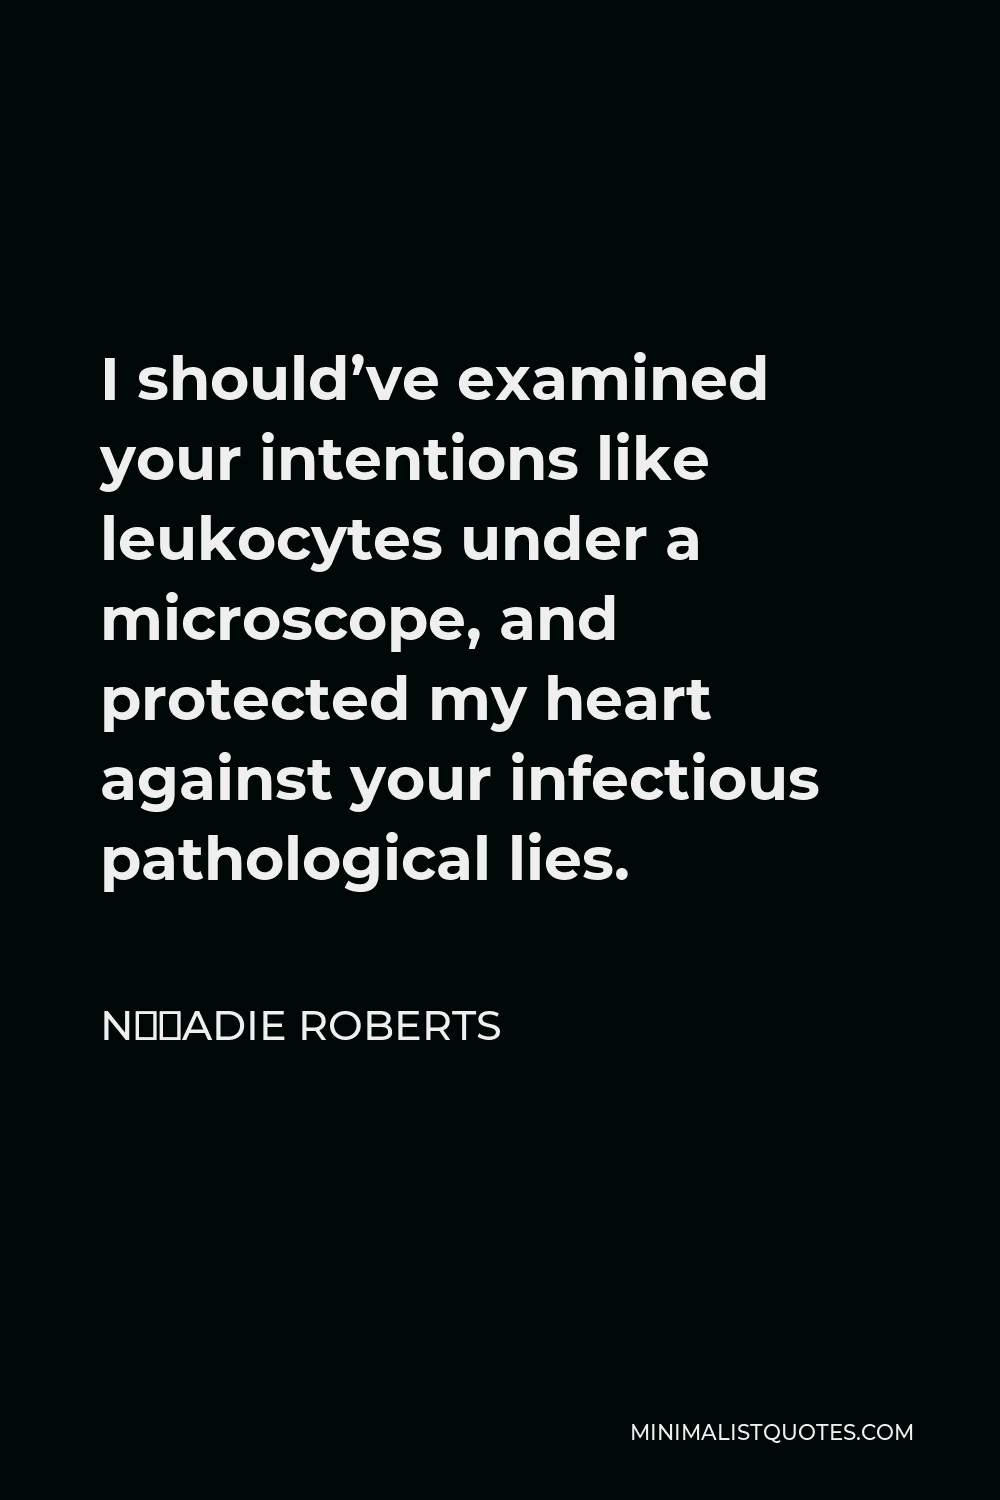 N’Gadie Roberts Quote - I should’ve examined your intentions like leukocytes under a microscope, and protected my heart against your infectious pathological lies.